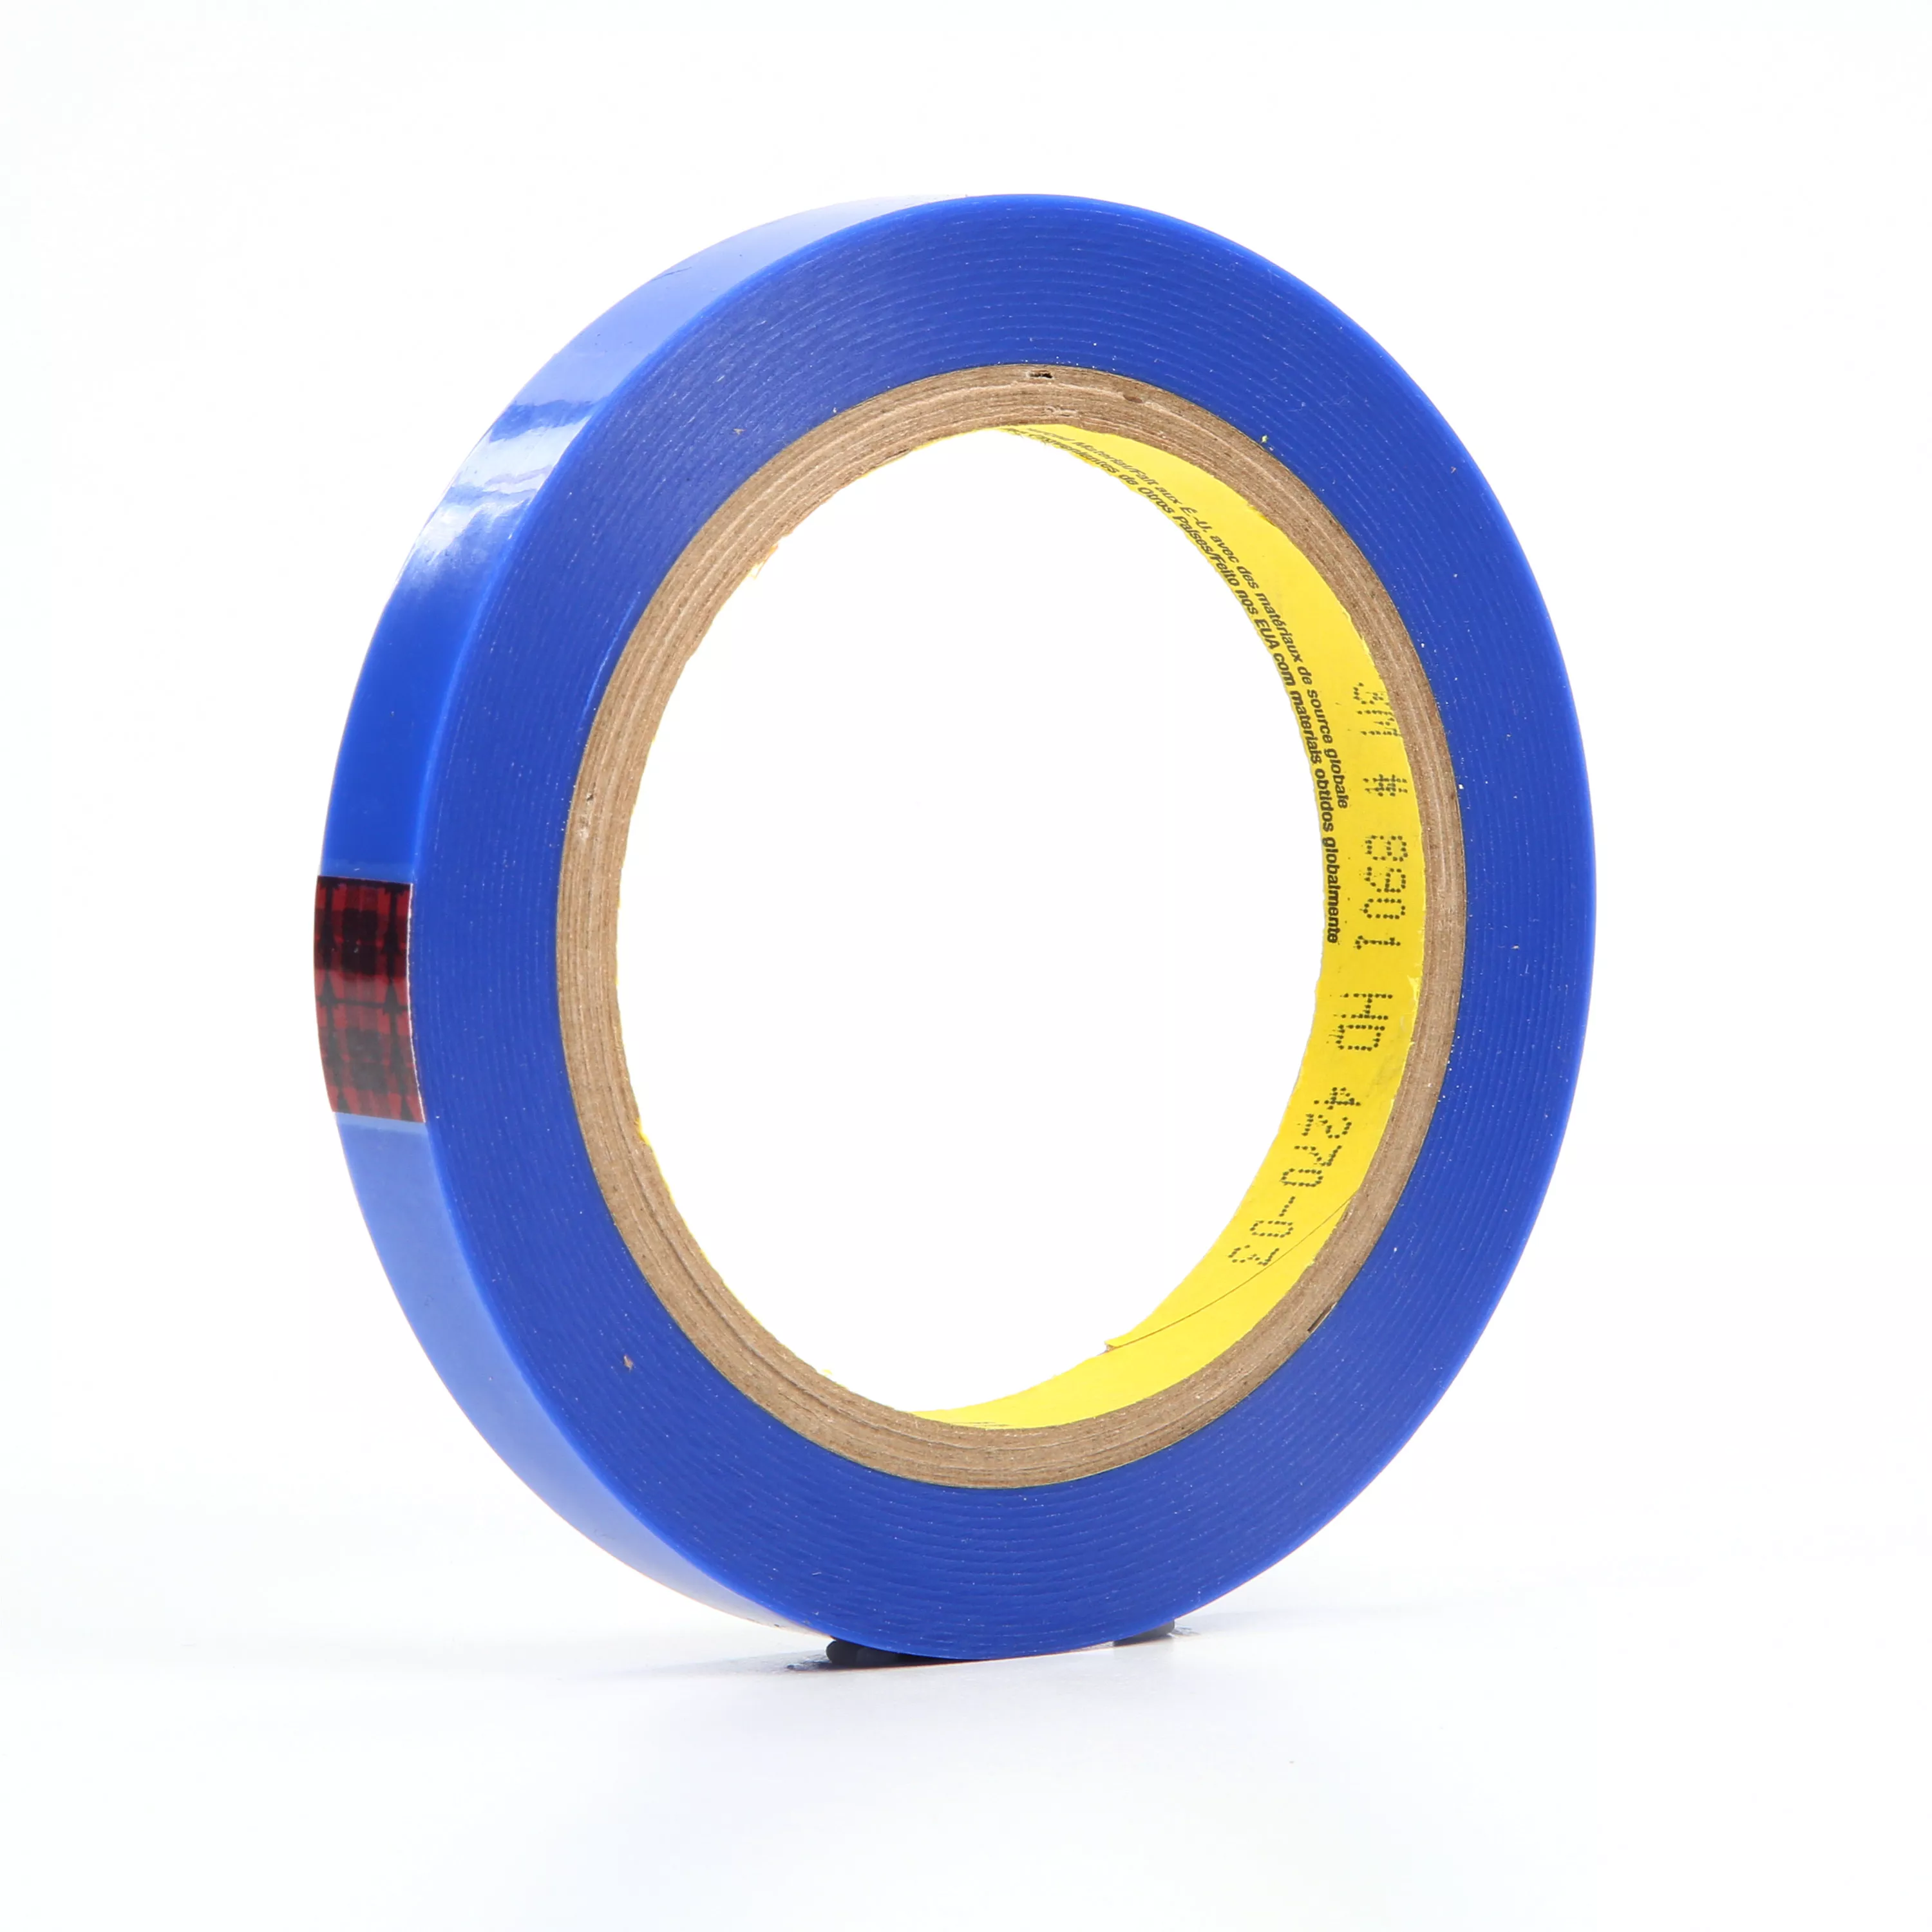 3M™ Polyester Tape 8901, Blue, 1/2 in x 72 yd, 0.9 mil, 72 Roll/Case